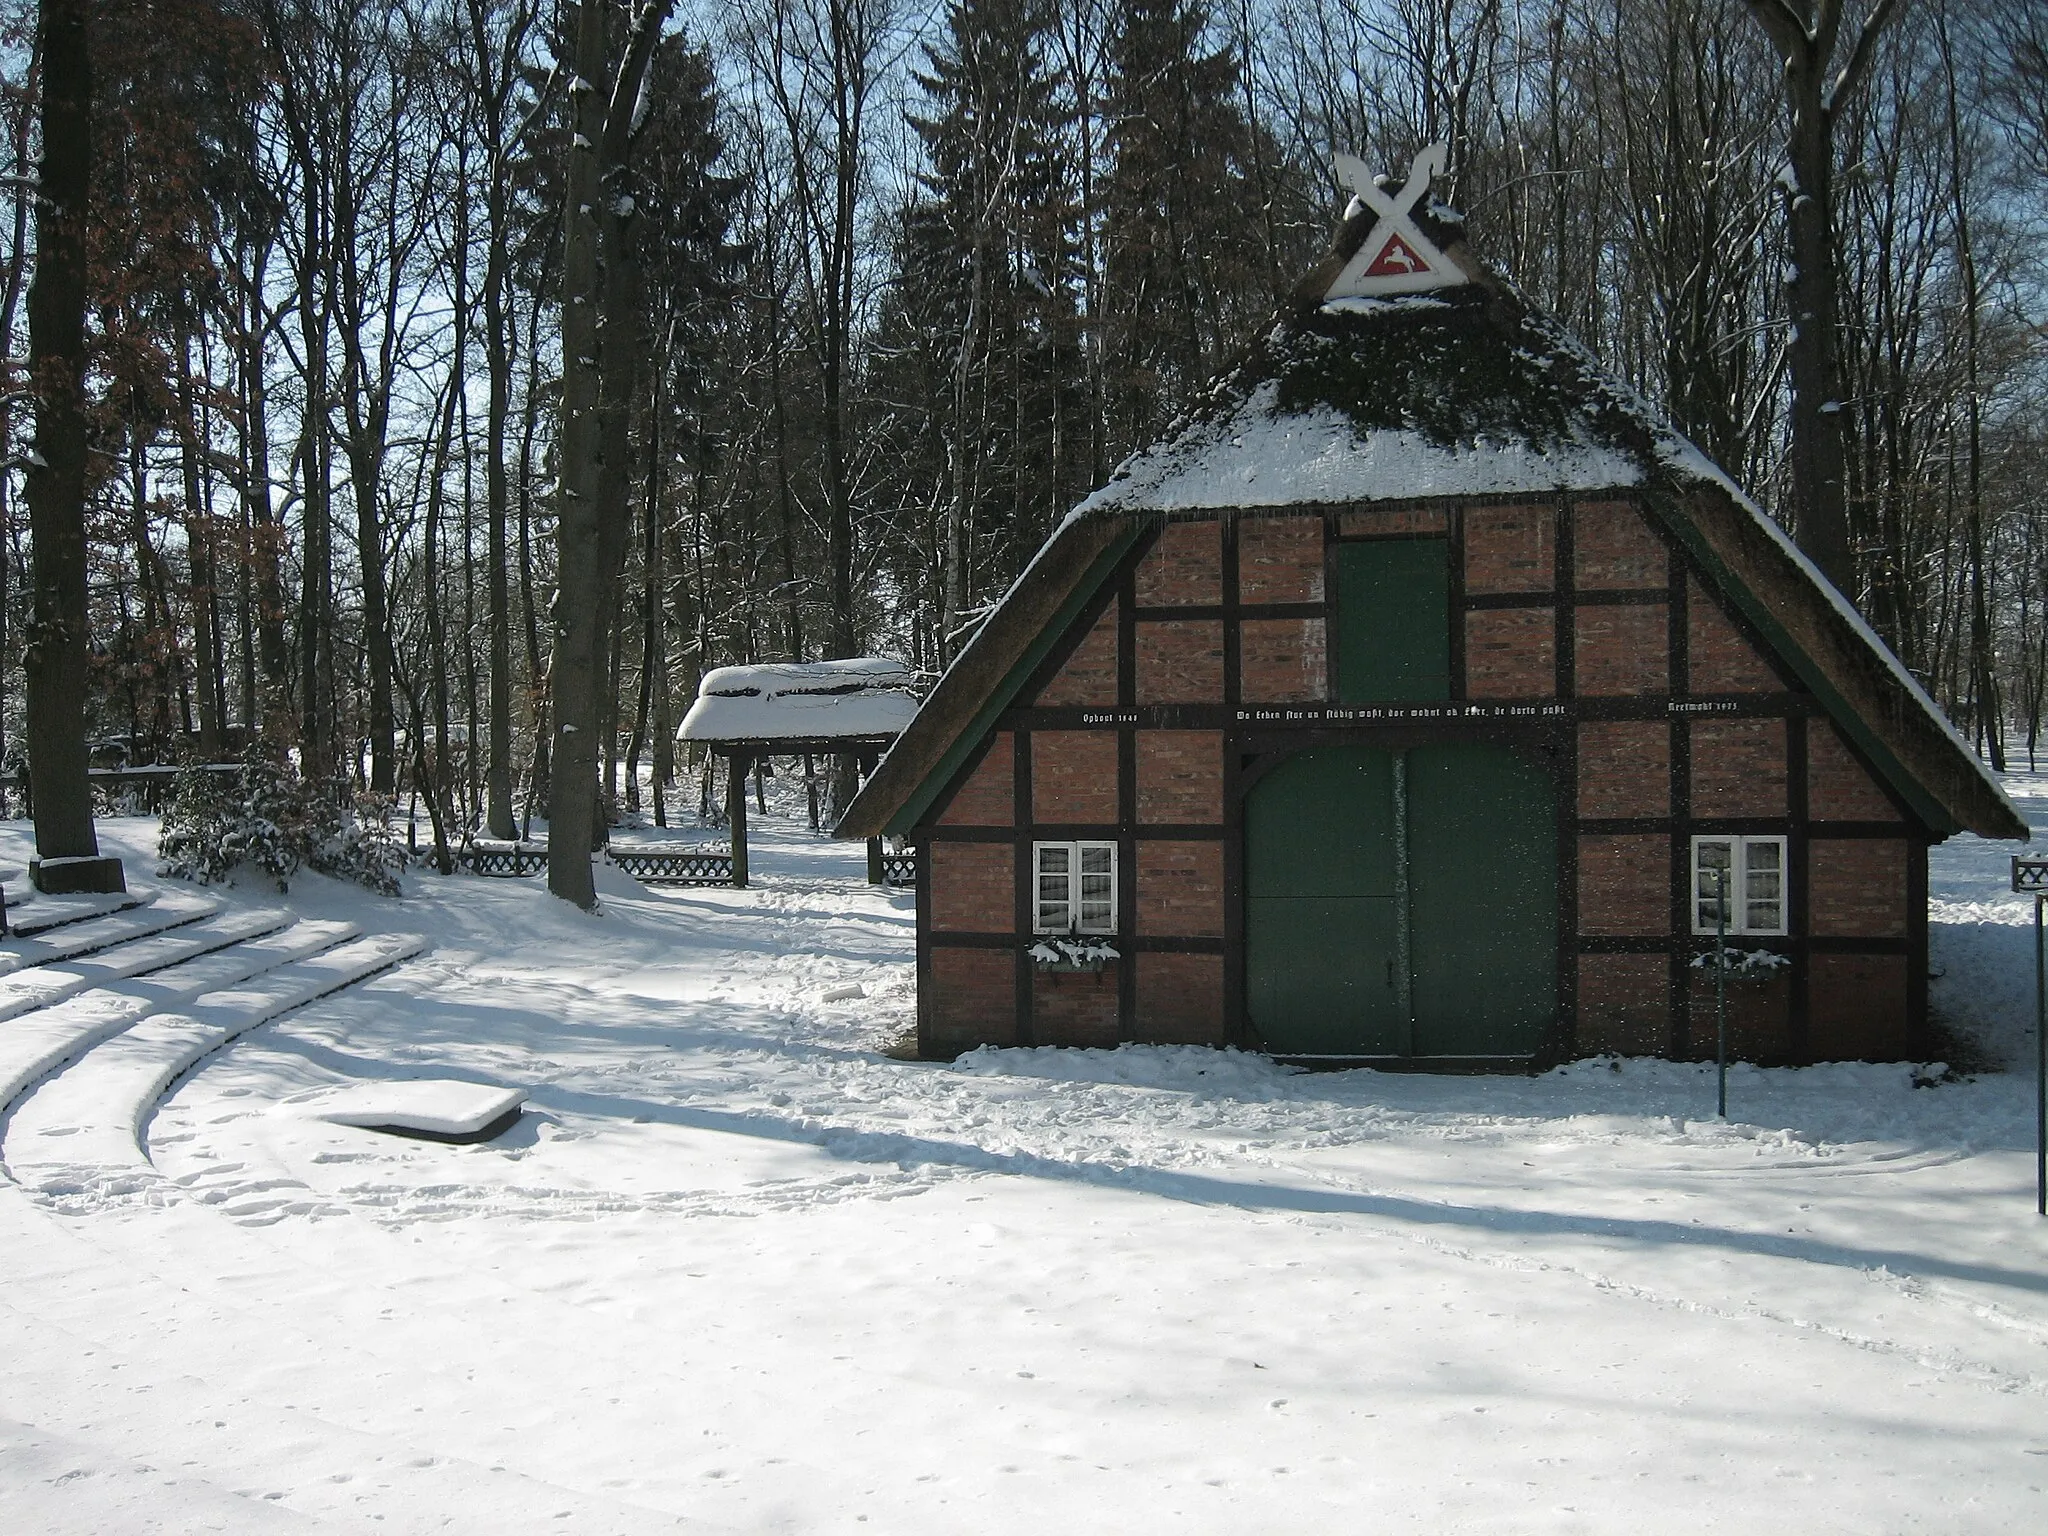 Photo showing: Winterscenery at the open air theater "Königshof" in Sittensen, Lower Saxony, Germany